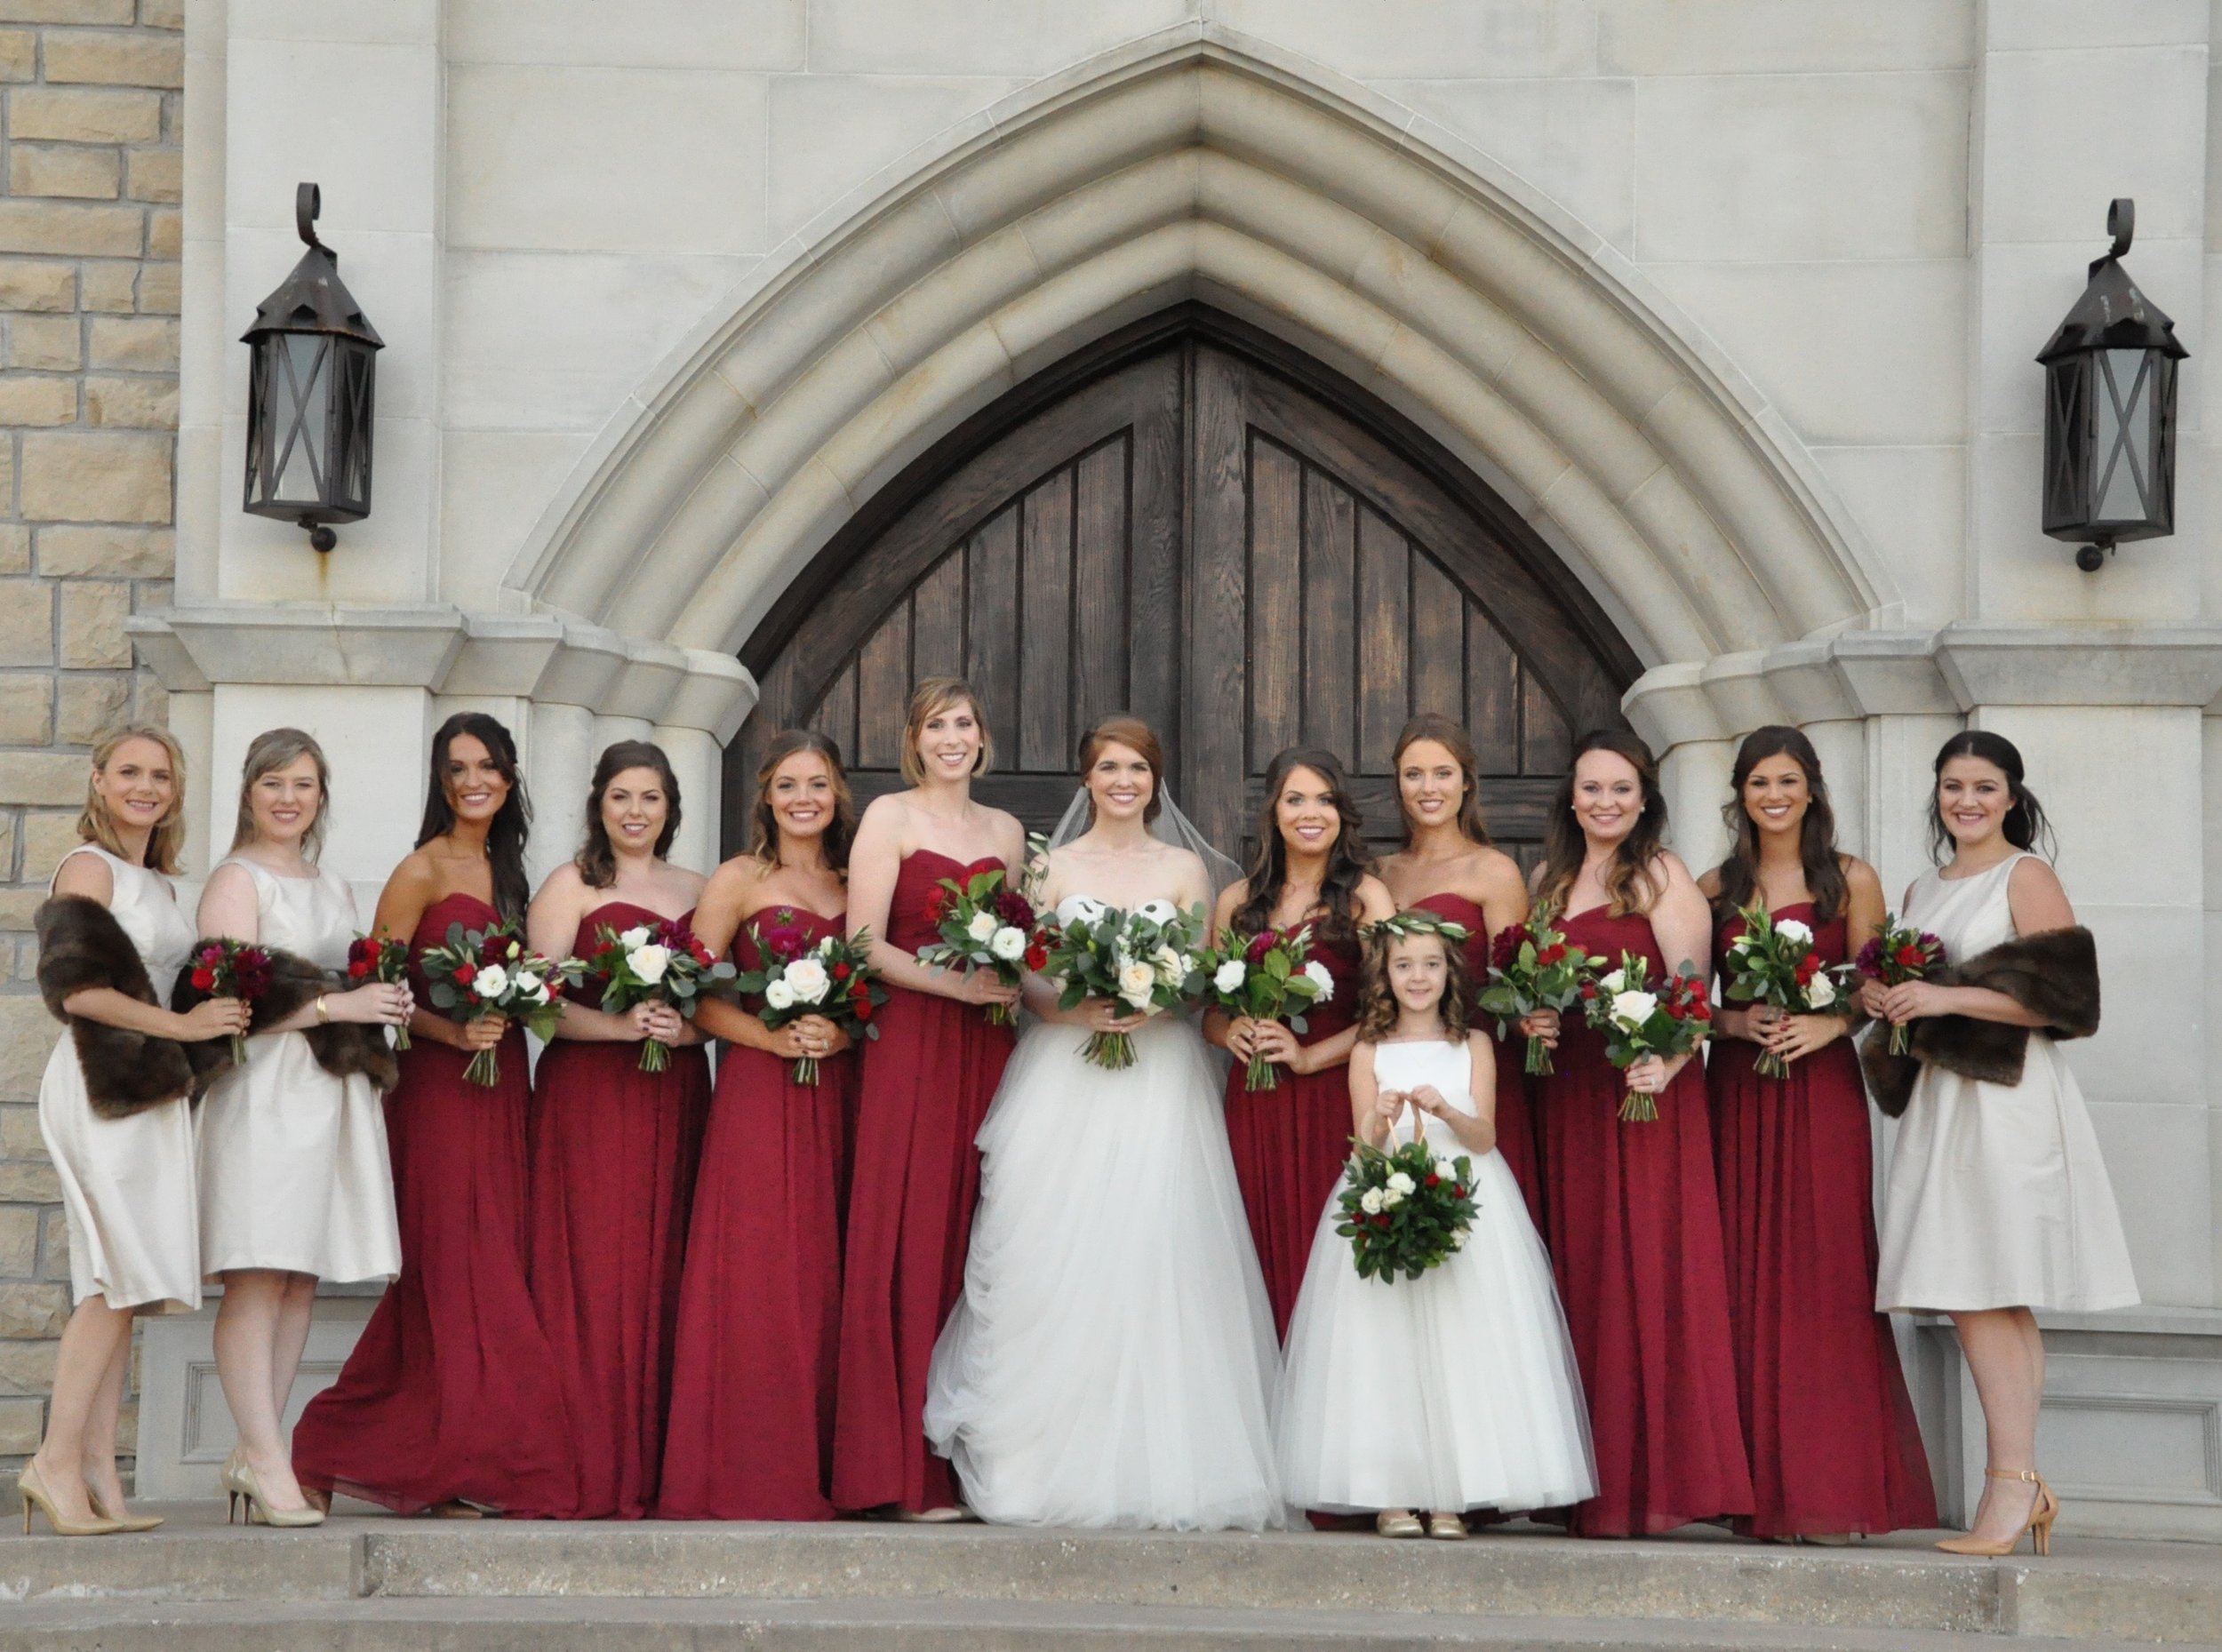 where to get married in dallas, places to get married in dallas, rockwall, the castle at rockwall, wedding tips, dallas bride, dfw wedding, heidi lockhart somes photography, grand slam glam